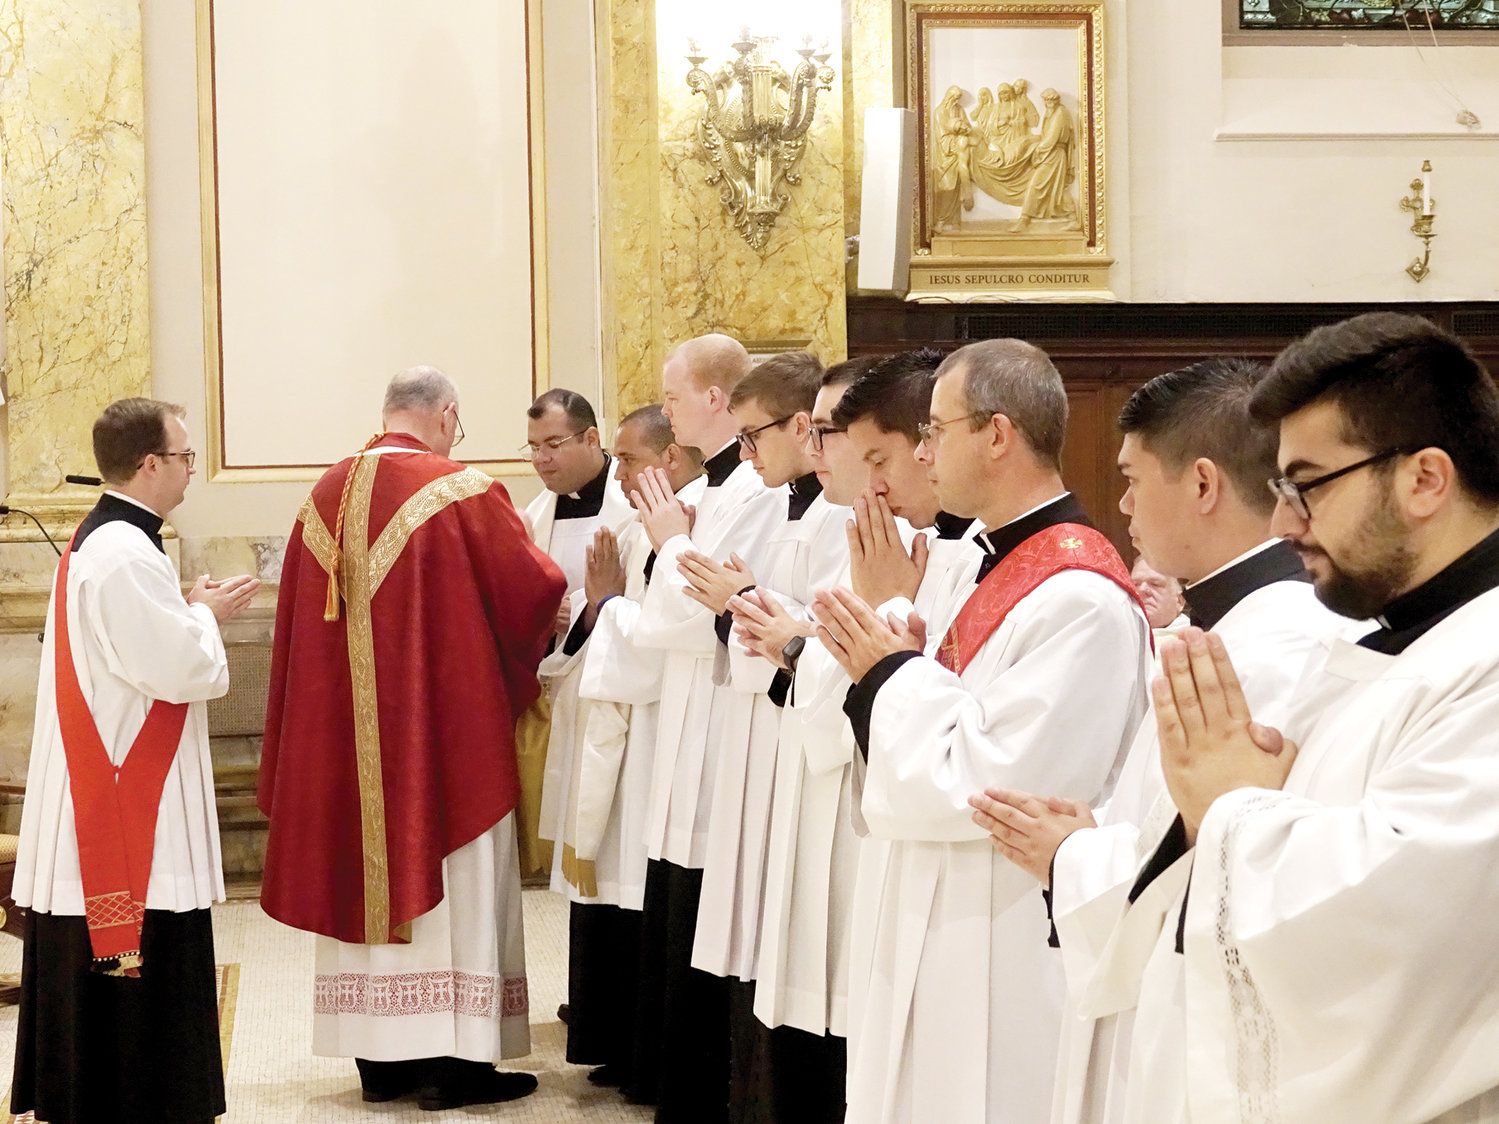 The cardinal distributes Communion to the seminarians.